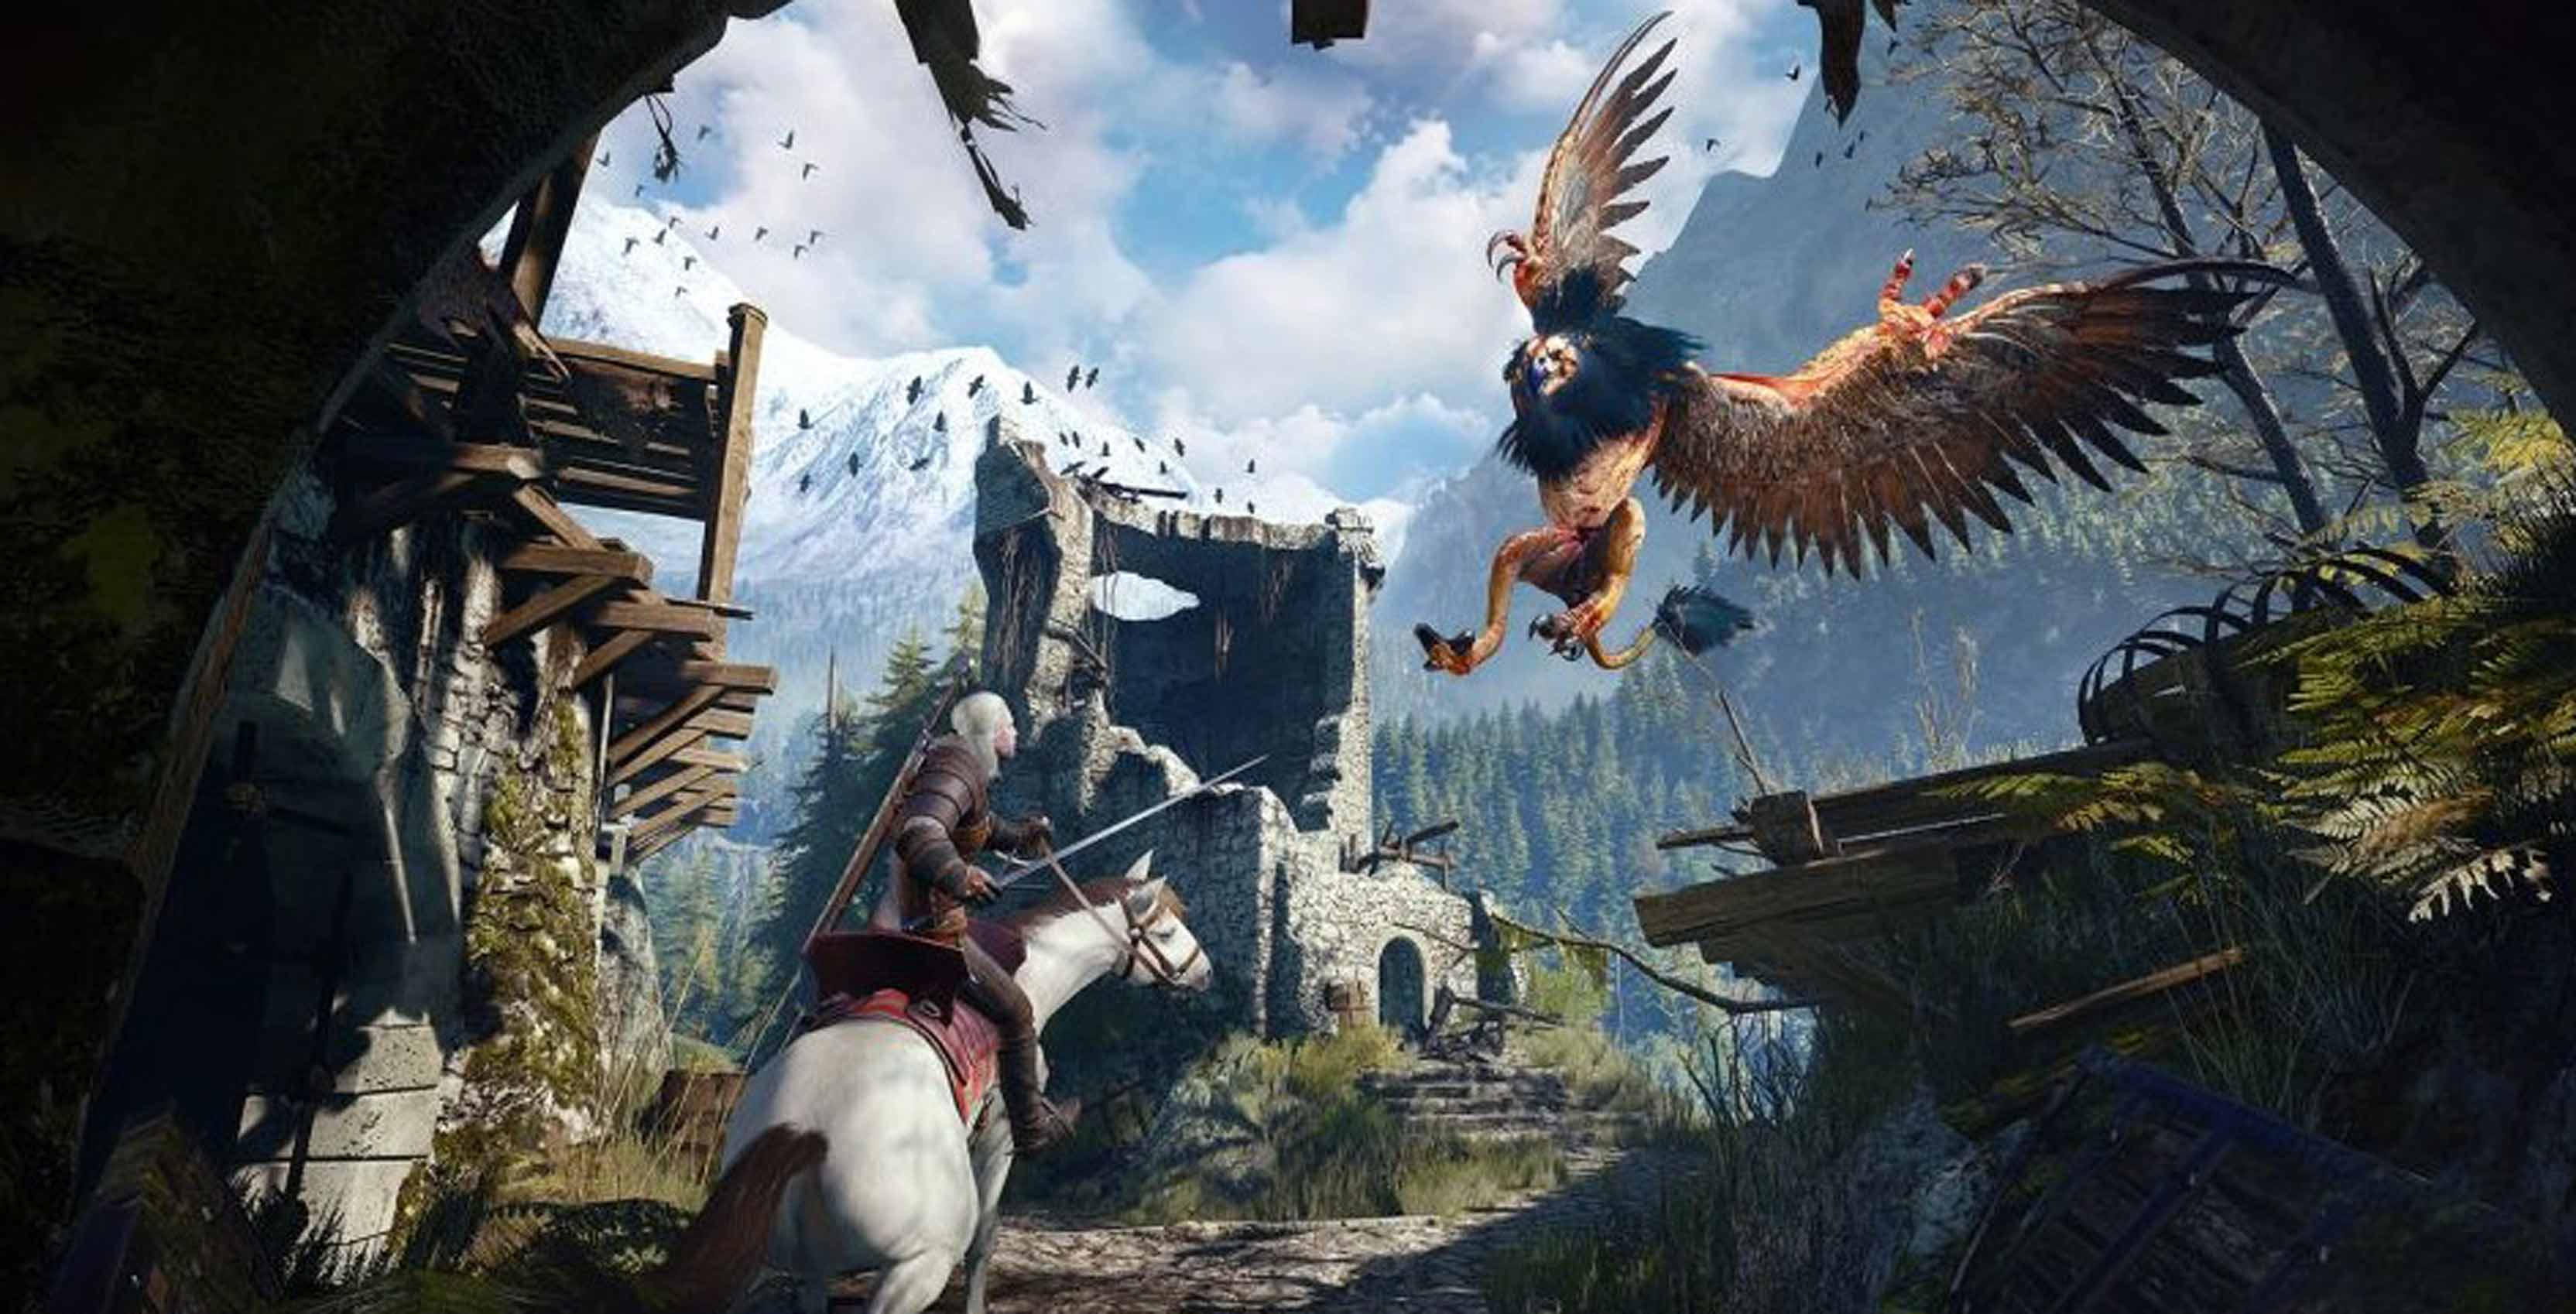 a screenshot from the Witcher 3: Wild Hunt